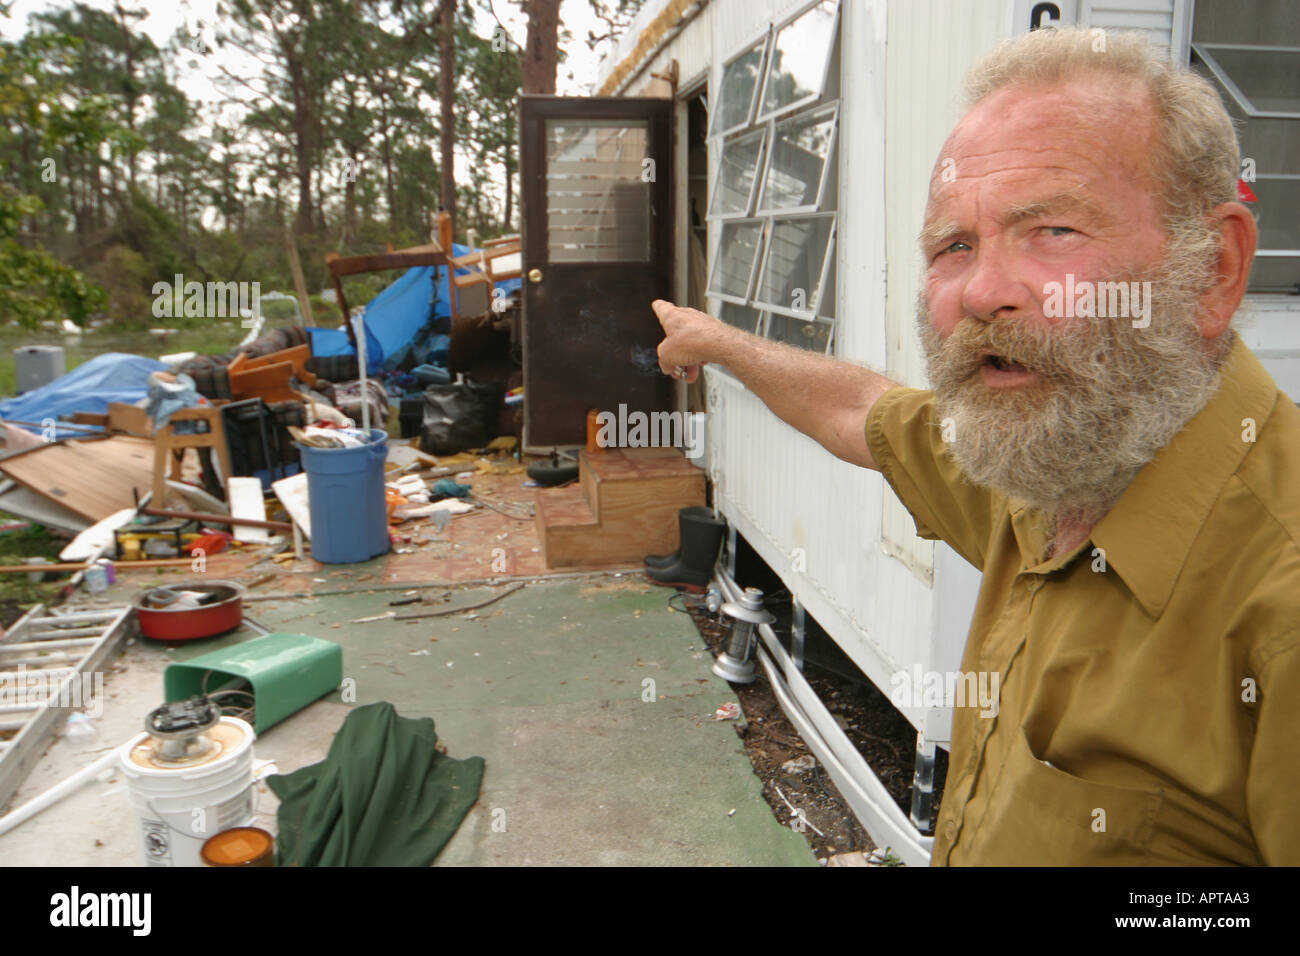 Florida Fort Pierce,weather,Hurricane Jeanne damage,wind,storm,weather,environment,destruction,trailer mobile home,motor home,RV,recreational vehicle, Stock Photo